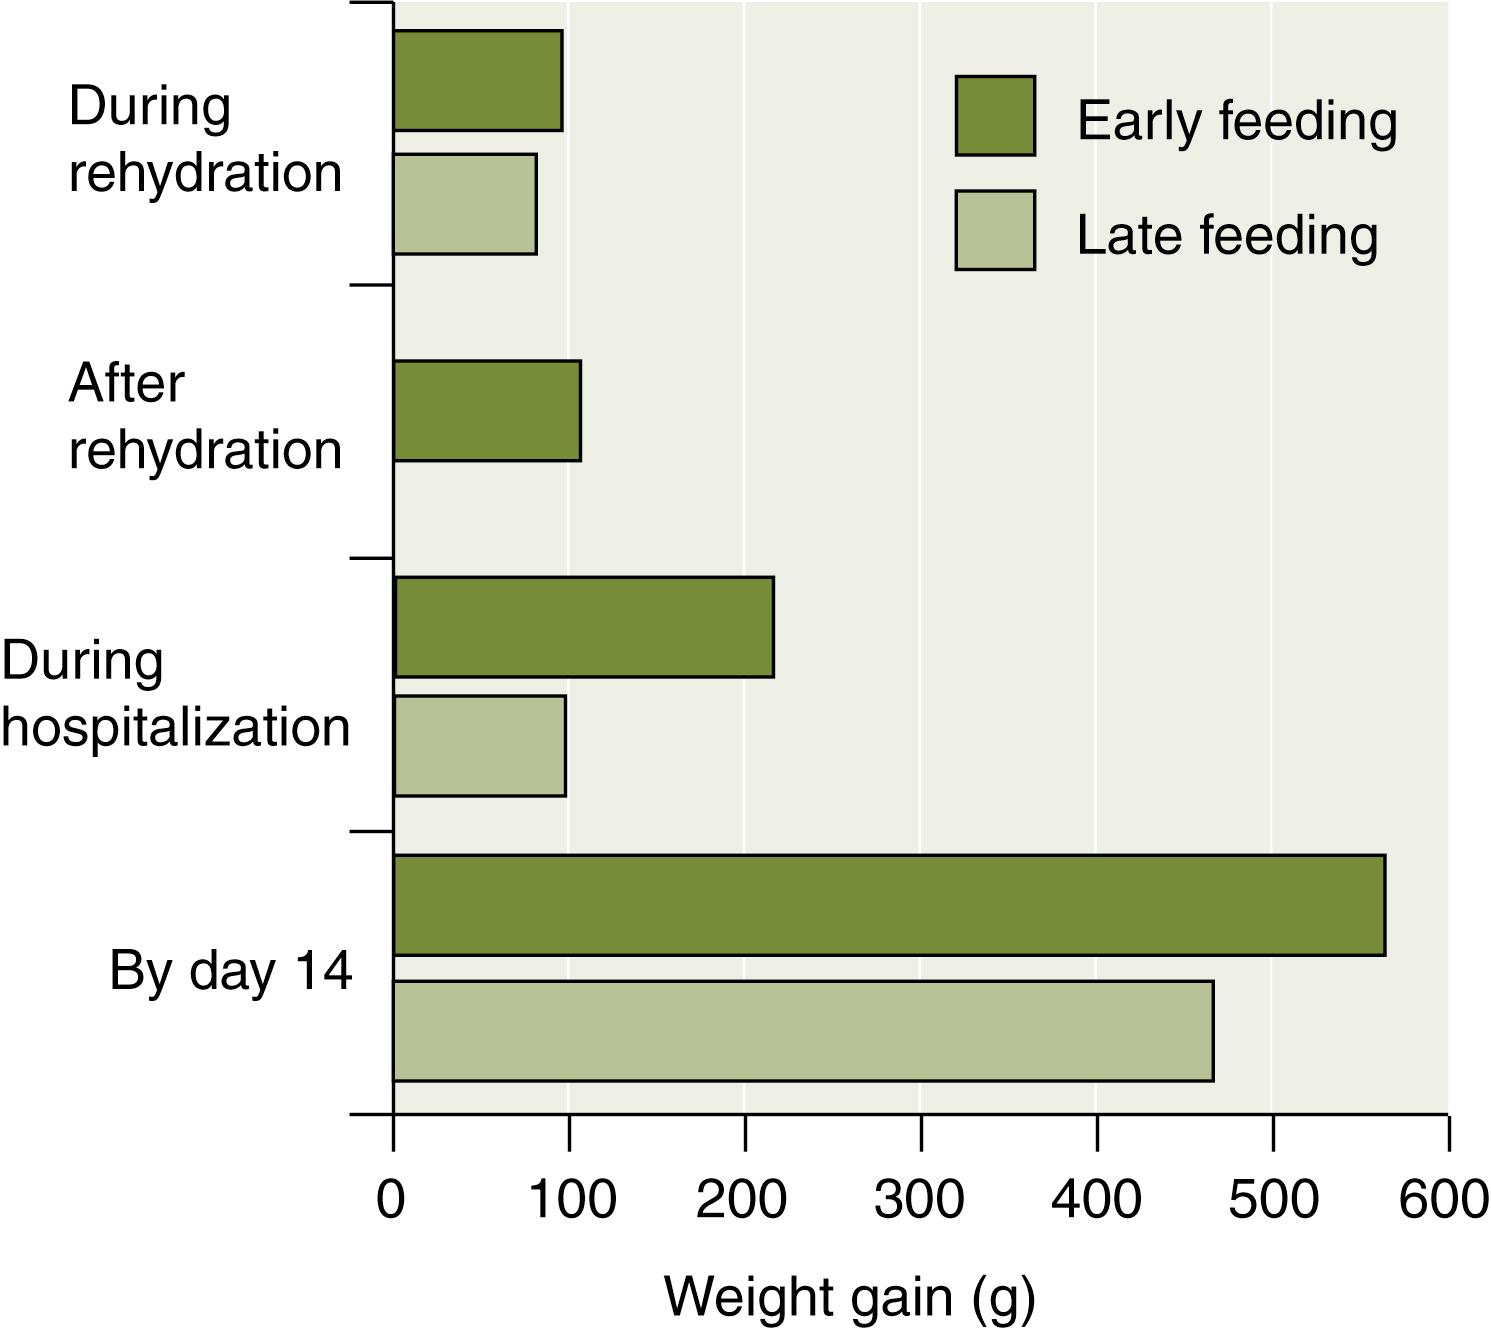 Fig. 90.2, European Society of Paediatric Gastroenterology, Hepatology and Nutrition study on early feeding. Comparison of weight gain between early feeding group and late feeding group.